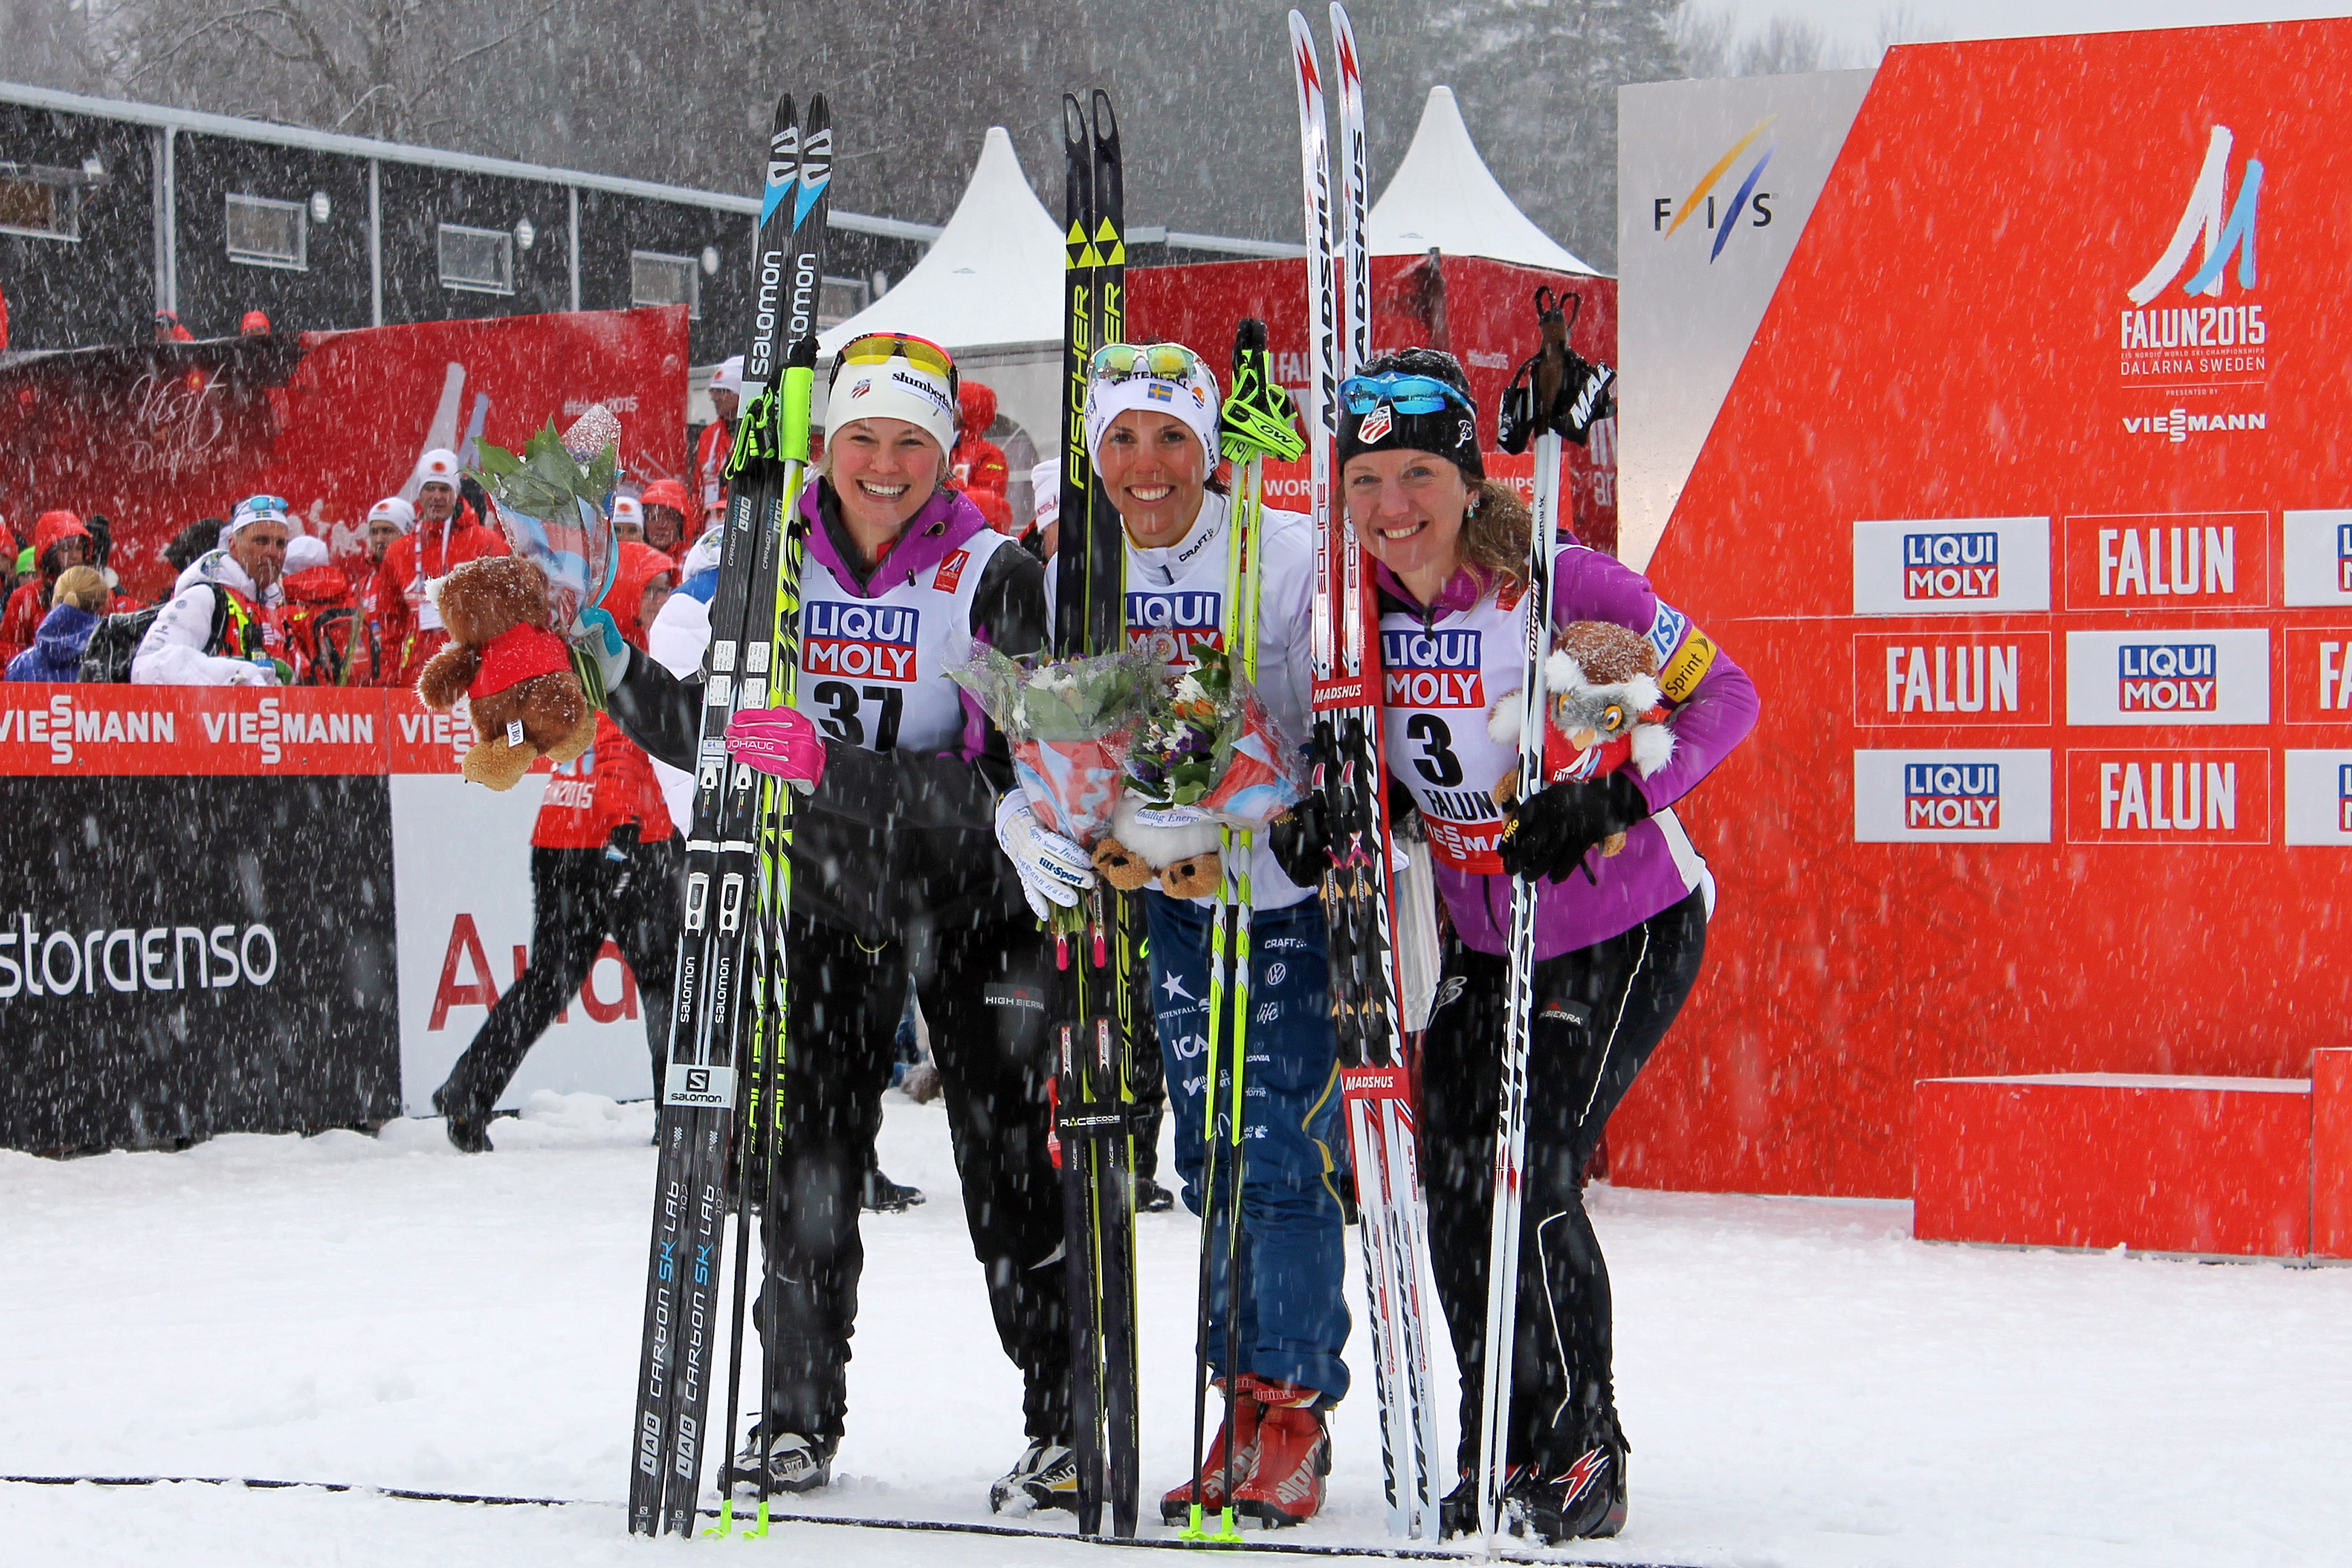 Six different U.S. women, including Jessie Diggins (l), ended the season ranked in the top 30 of the World Cup standings for either sprinting, distance skiing, or in some cases both, which is a record number. Caitlin Gregg (r) didn't get in the Red Group, but she did get a World Championships bronze medal. As a team, the U.S. women ranked sixth in the 2014-2015 season.